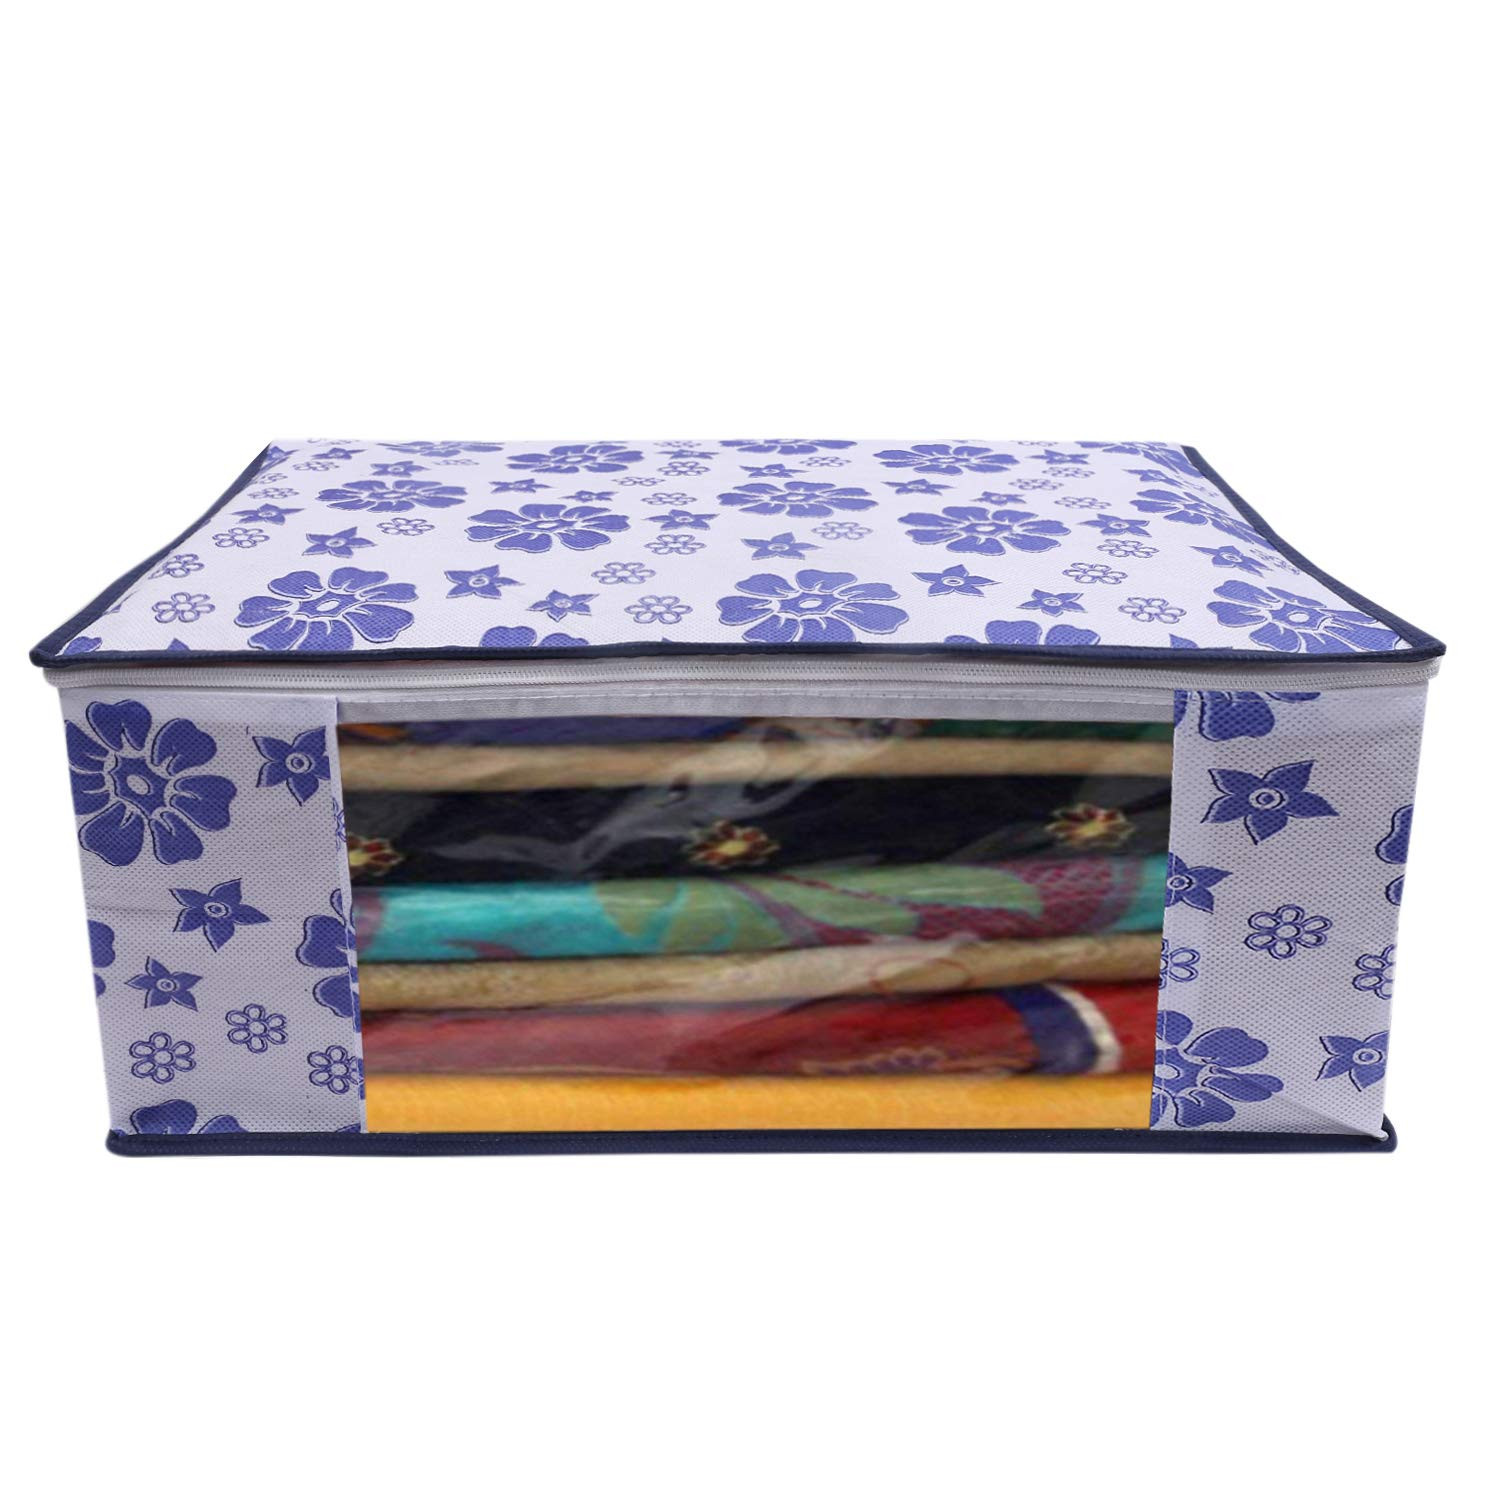 Kuber Industries Metalic & Flower Printed Non Woven Fabric Saree Cover Set with Transparent Window, Extra Large, Golden Brown & Pink & Blue -CTKTC40805